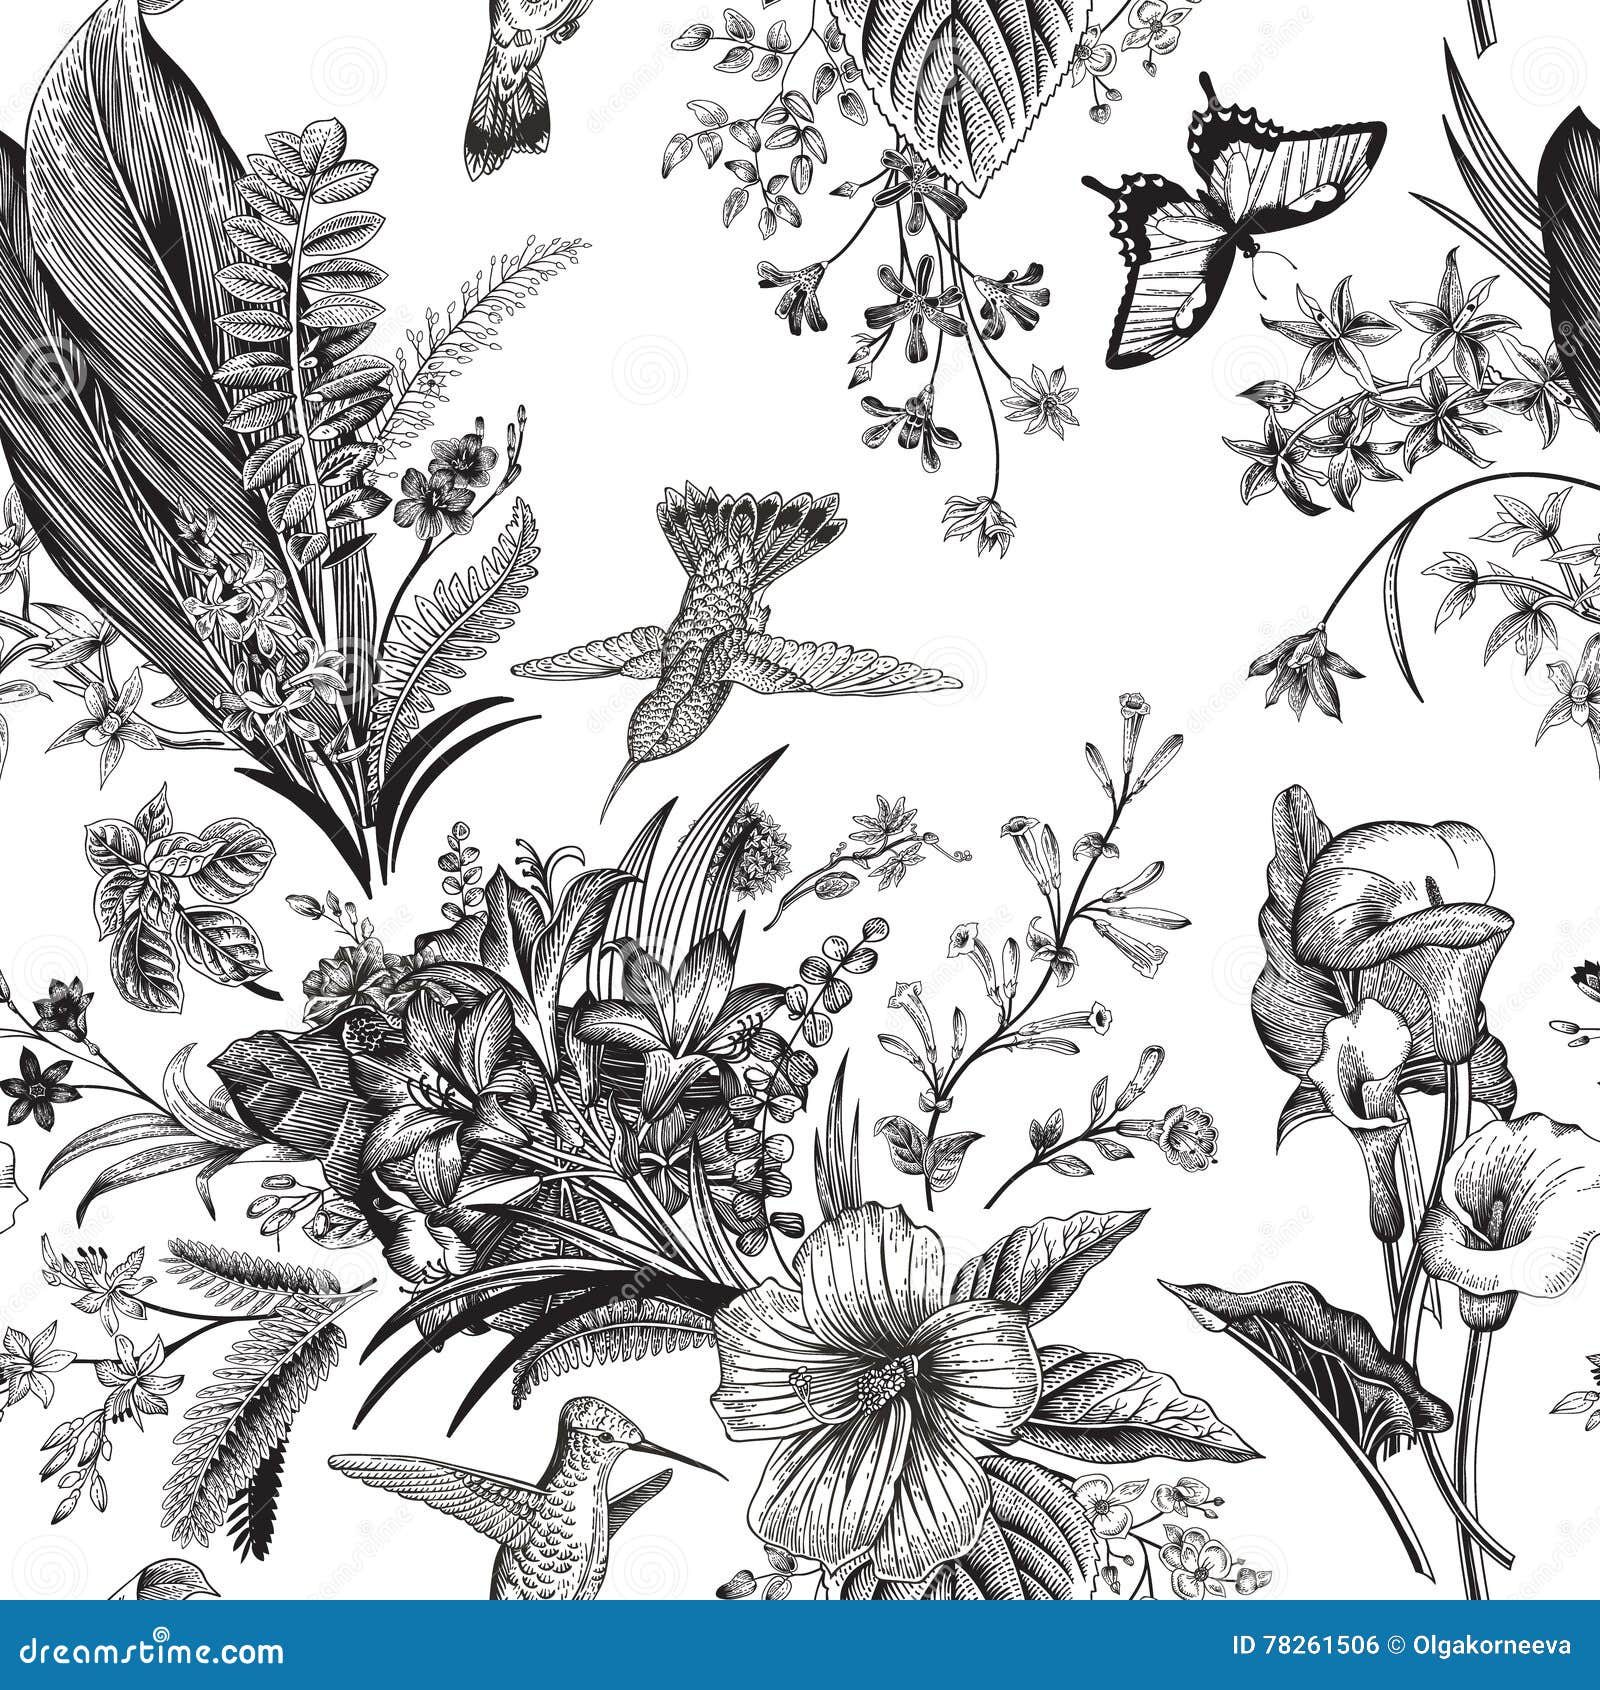  seamless vintage floral pattern. exotic flowers and birds.